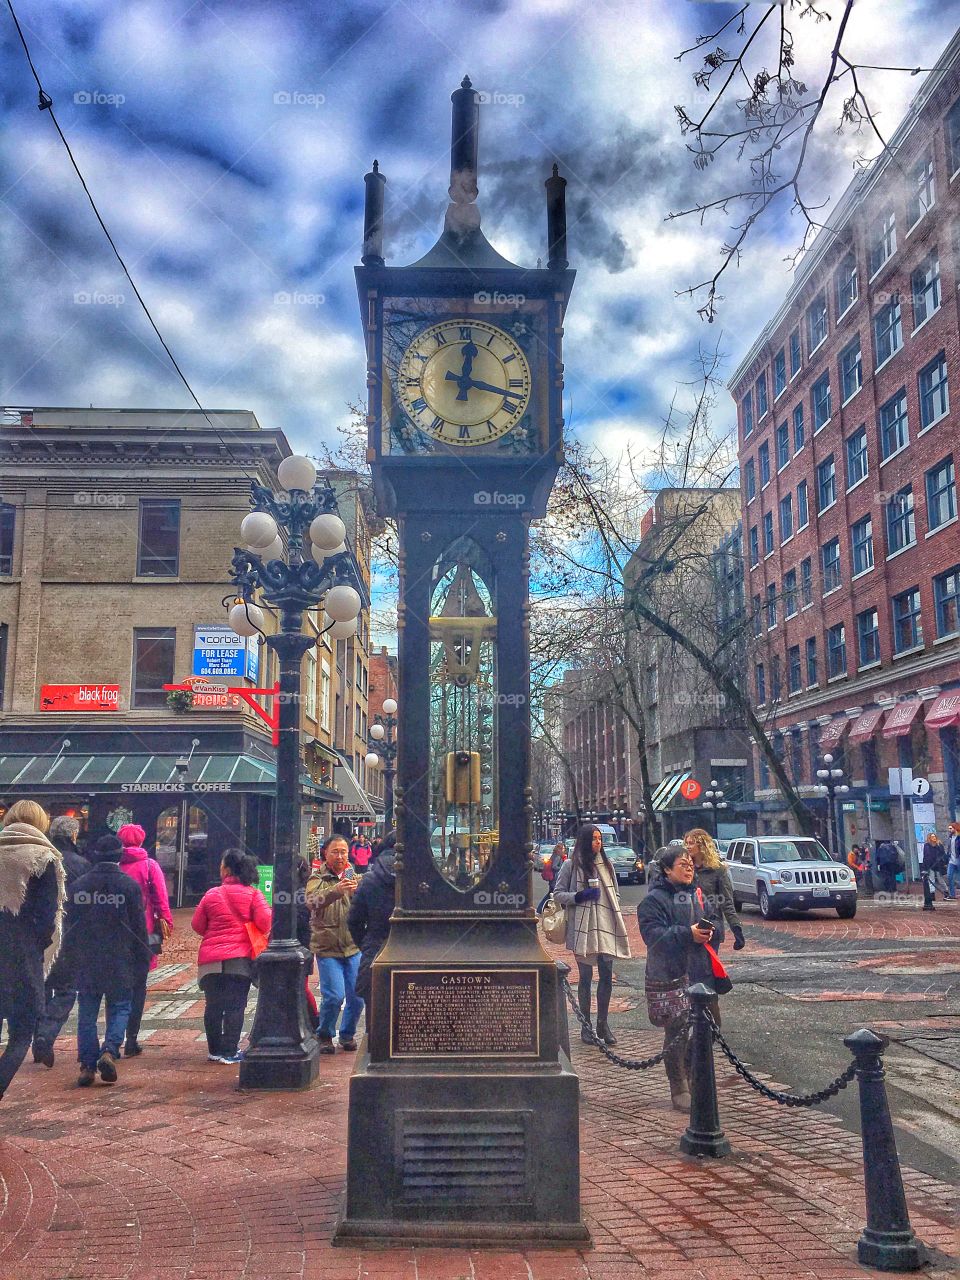 'Don't count every hour of the day, make every hour of the day count' 👌🏼
Steamworks Clock, Gastown, Vancouver 🇨🇦
